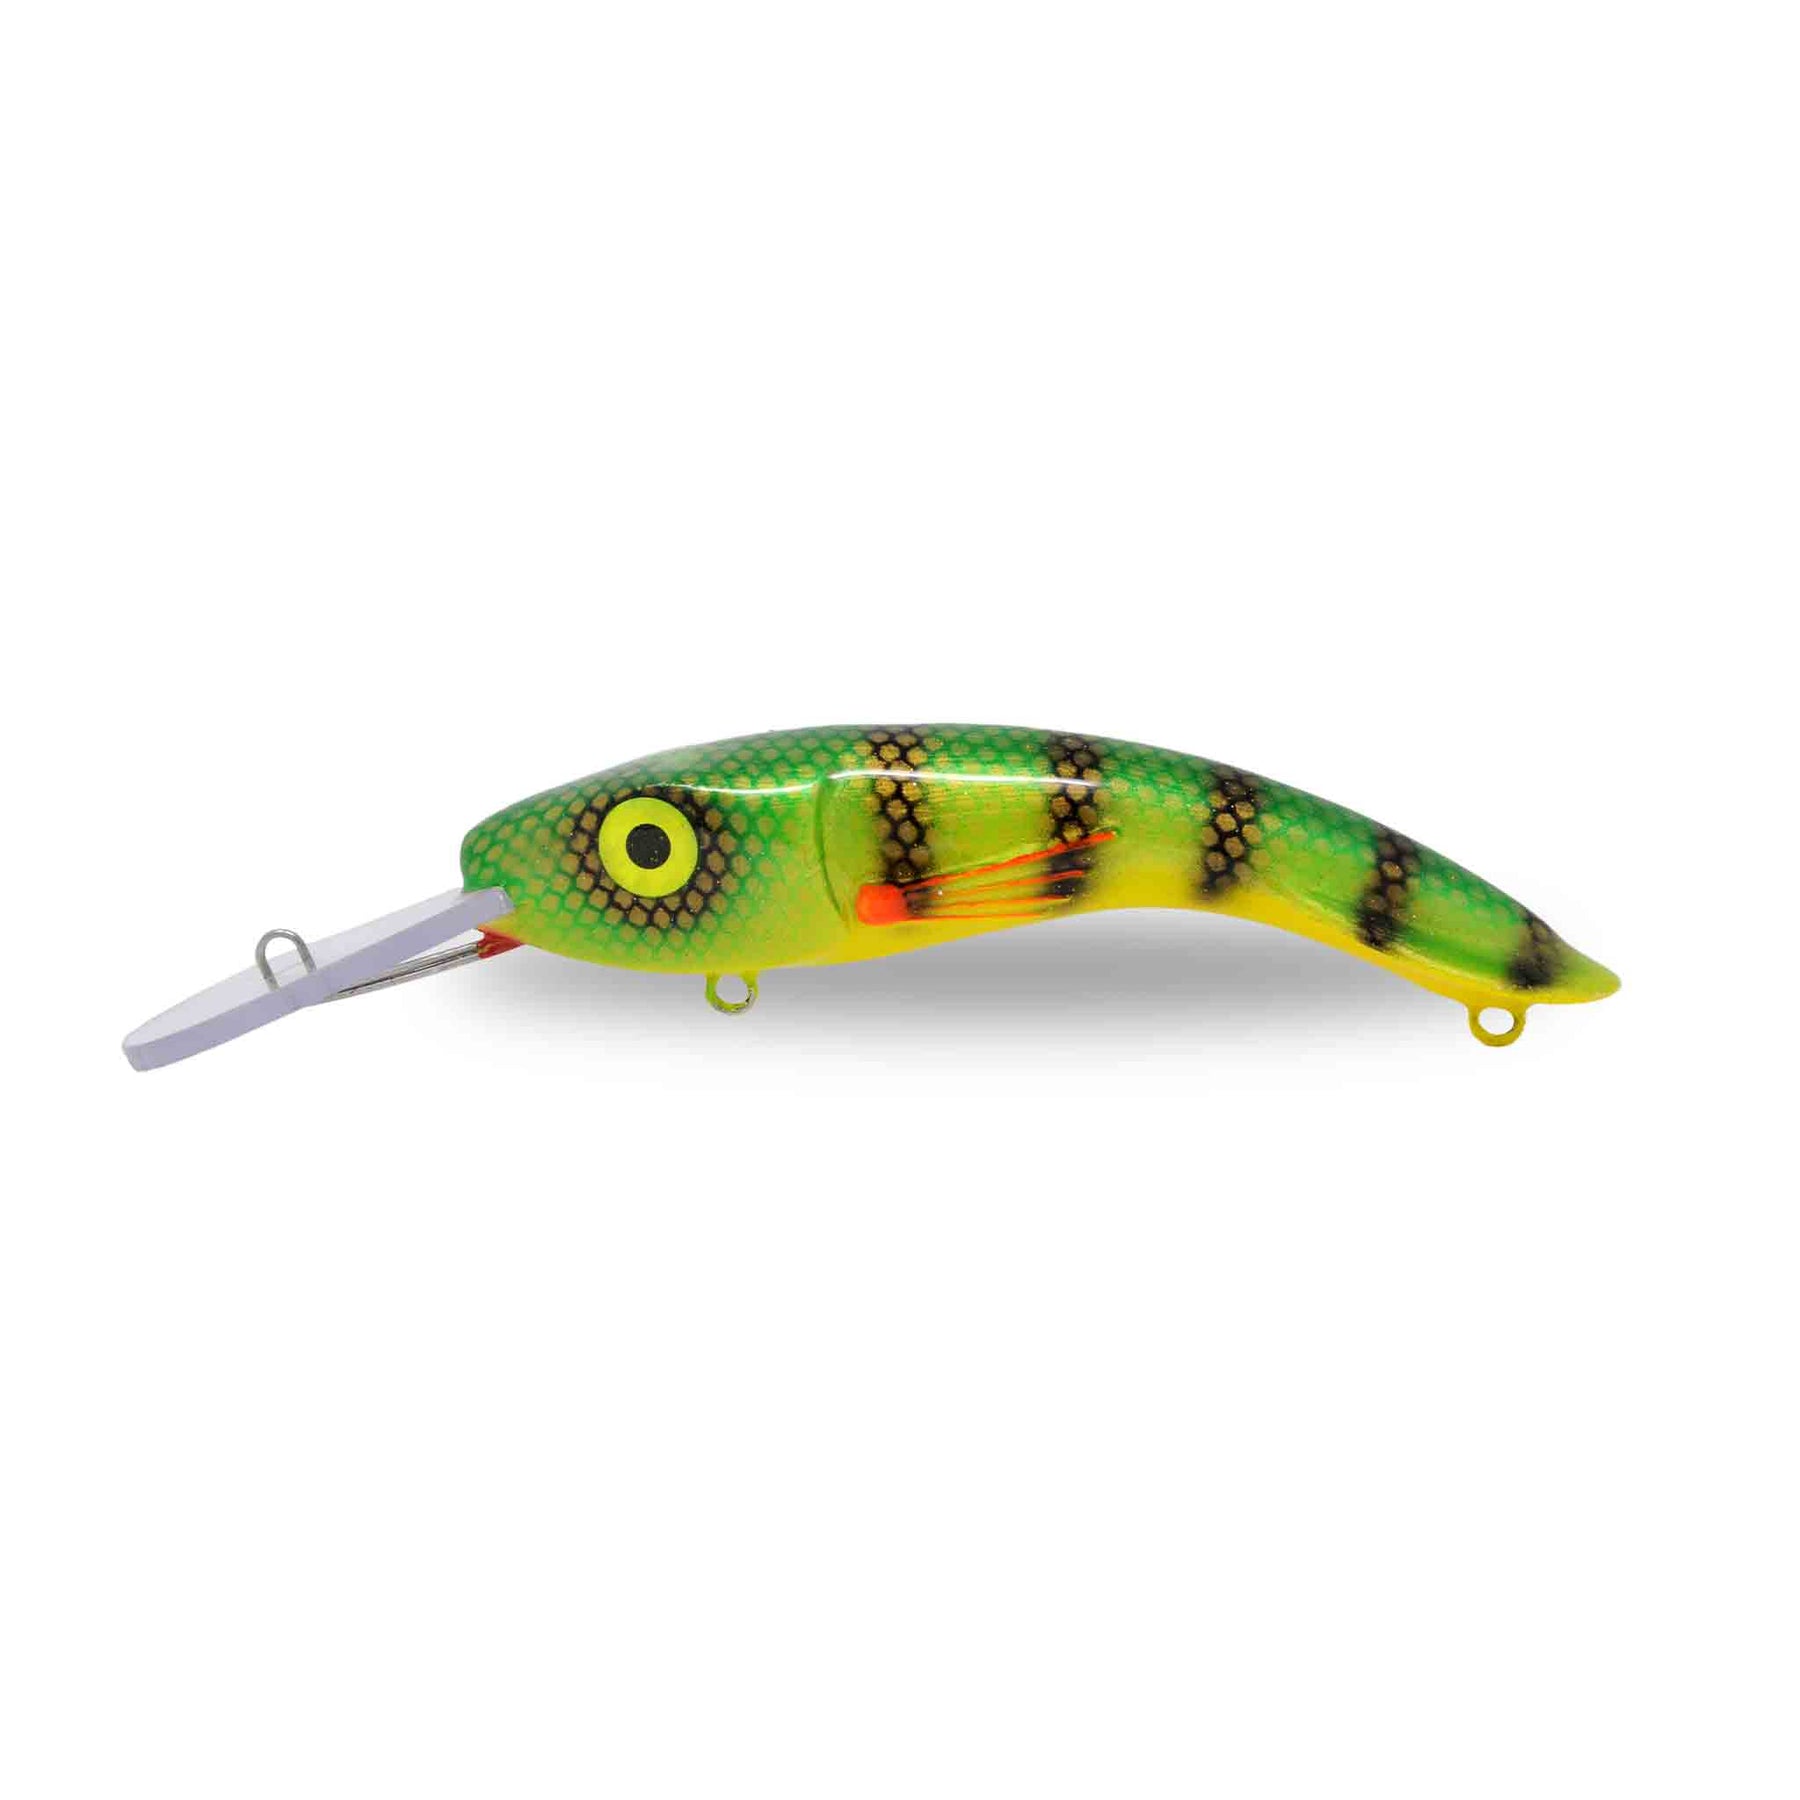 View of Crankbaits One Shot Tackle Perchosaurus 7" Crankbait available at EZOKO Pike and Musky Shop